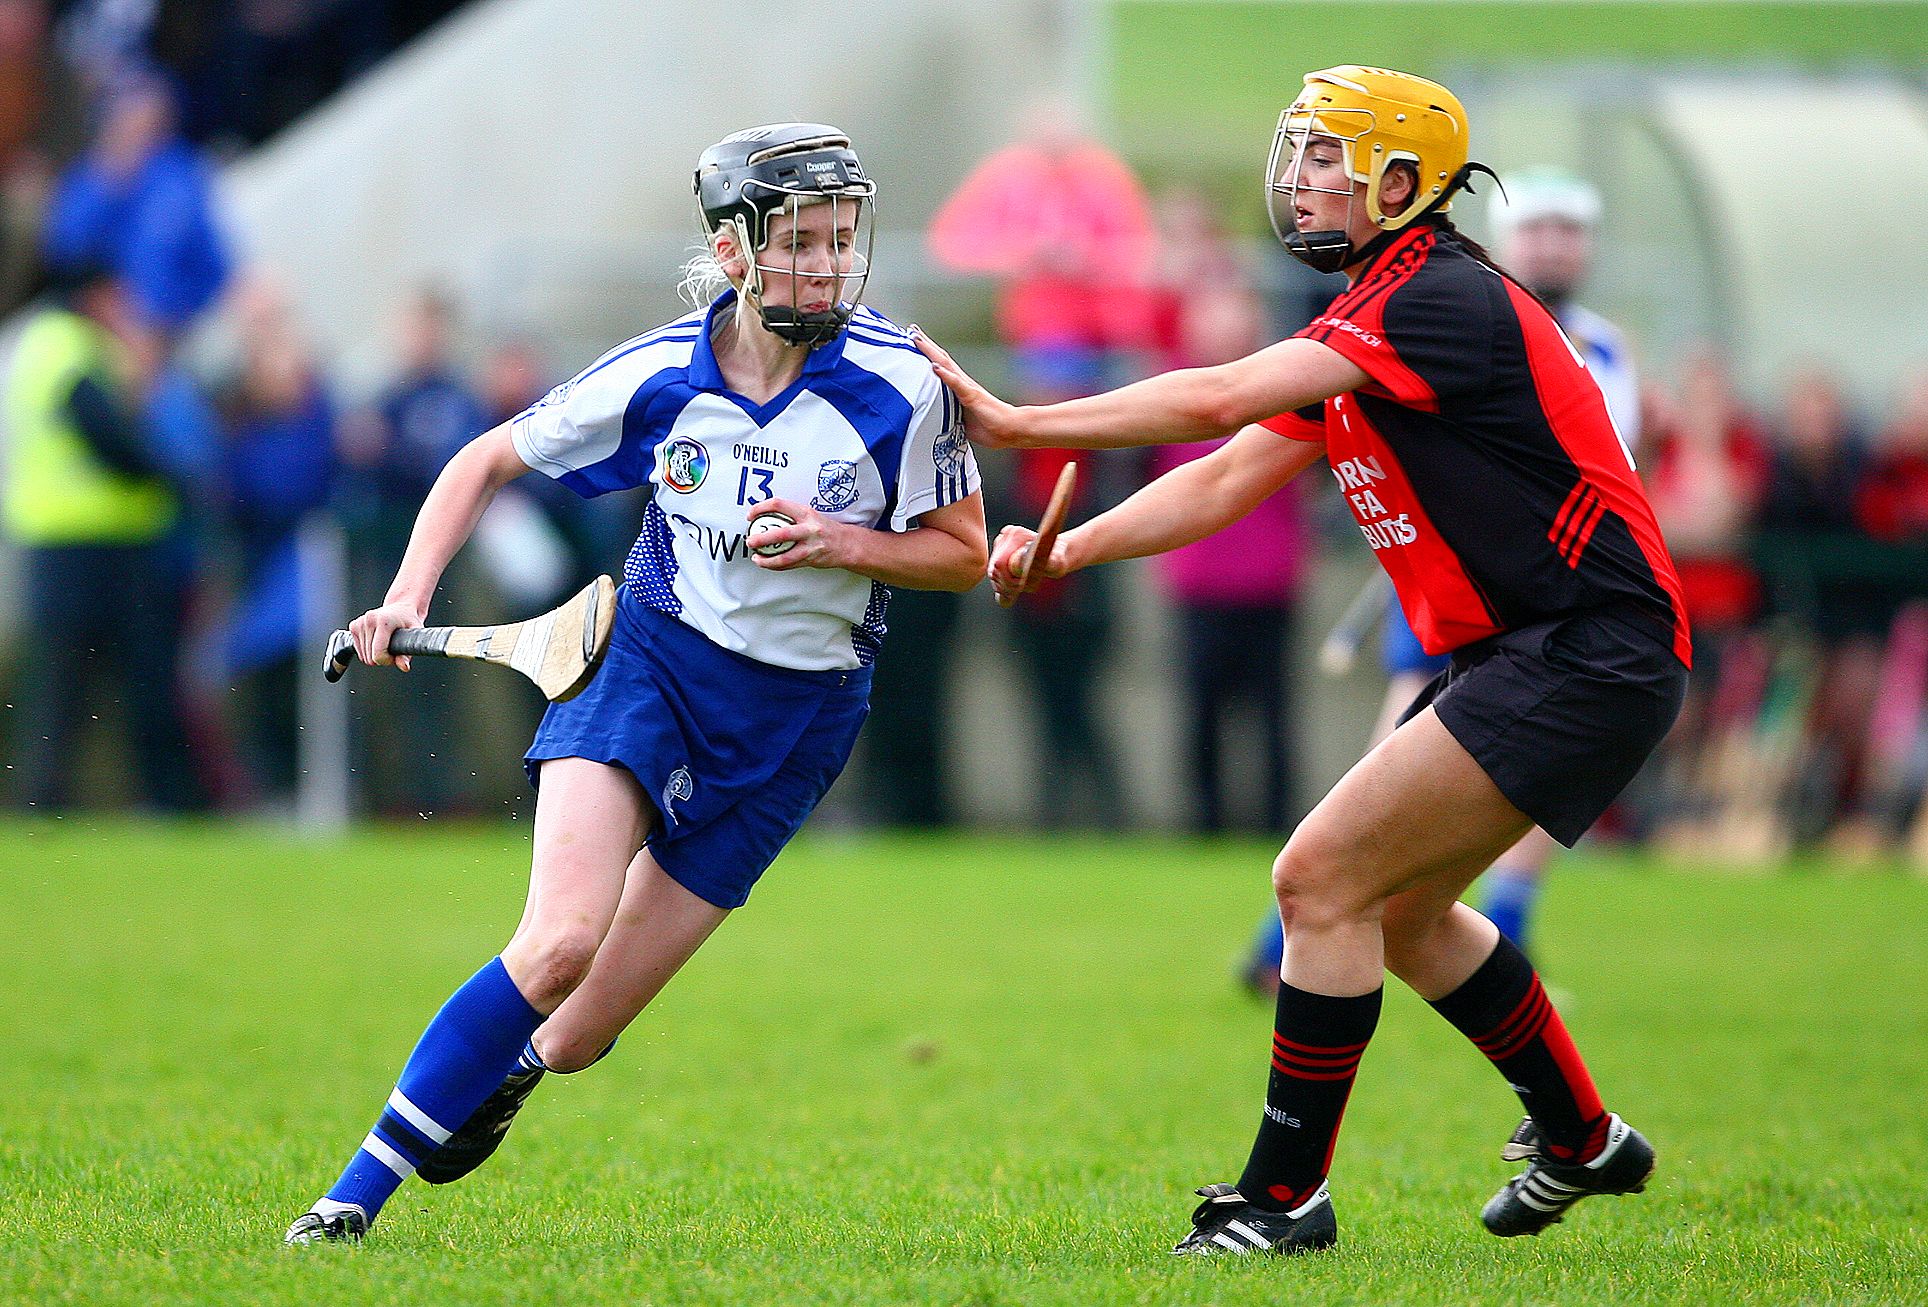 AIB All Ireland Senior Camogie Club Championship Semi-Final, Carriganore, Waterford 31/1/2016 Milford vs Oulart-The Ballagh Milford's Marie O'Neill and Oulart-The BallaghÕs Ciara Storey Mandatory Credit ©INPHO/Ken Sutton